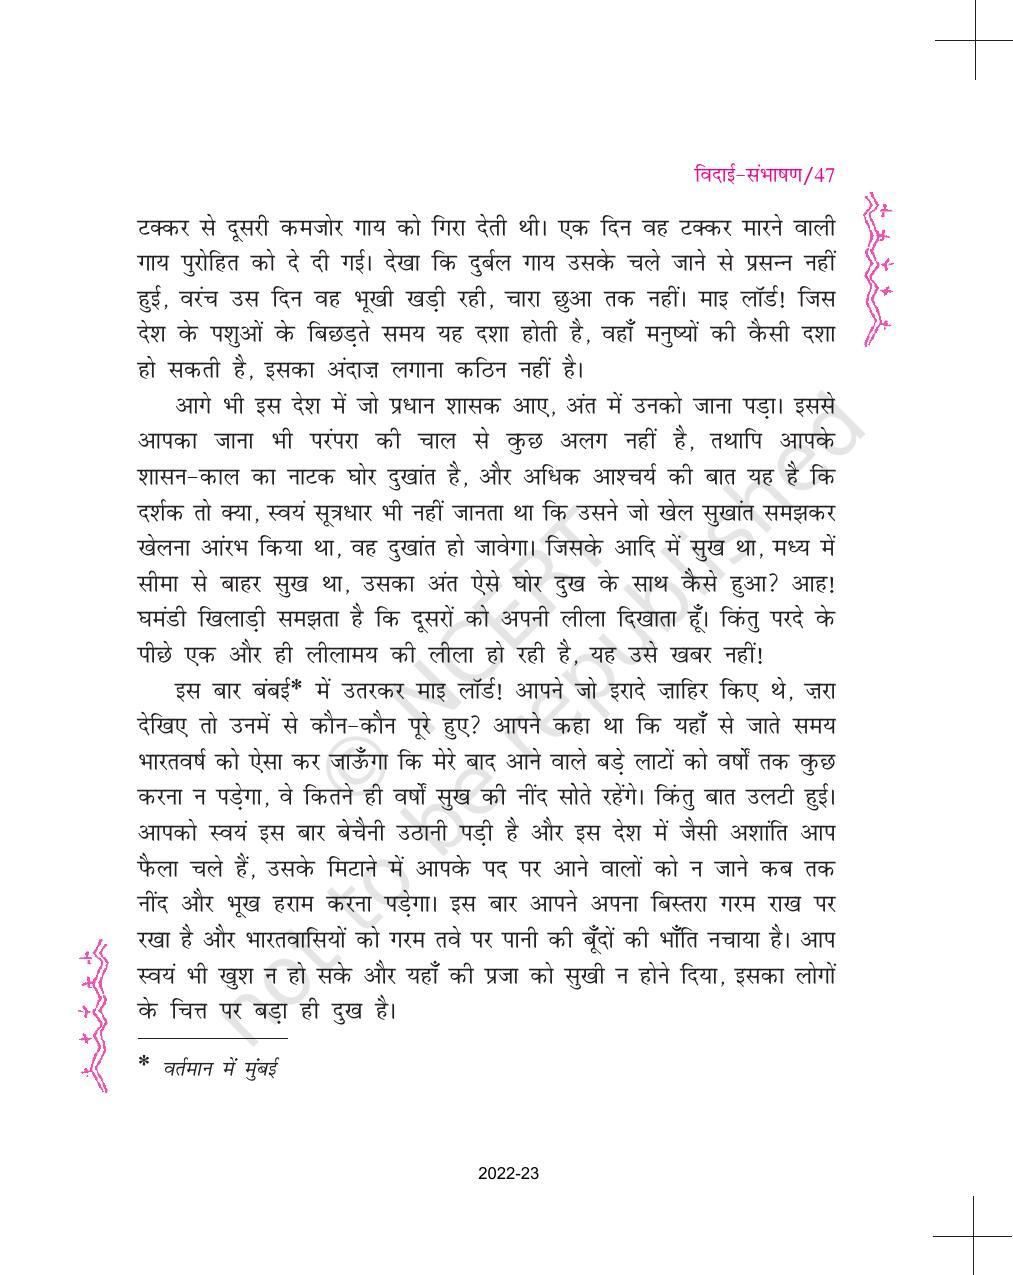 NCERT Book for Class 11 Hindi Aroh Chapter 4 विदाई – संभाषण - Page 4